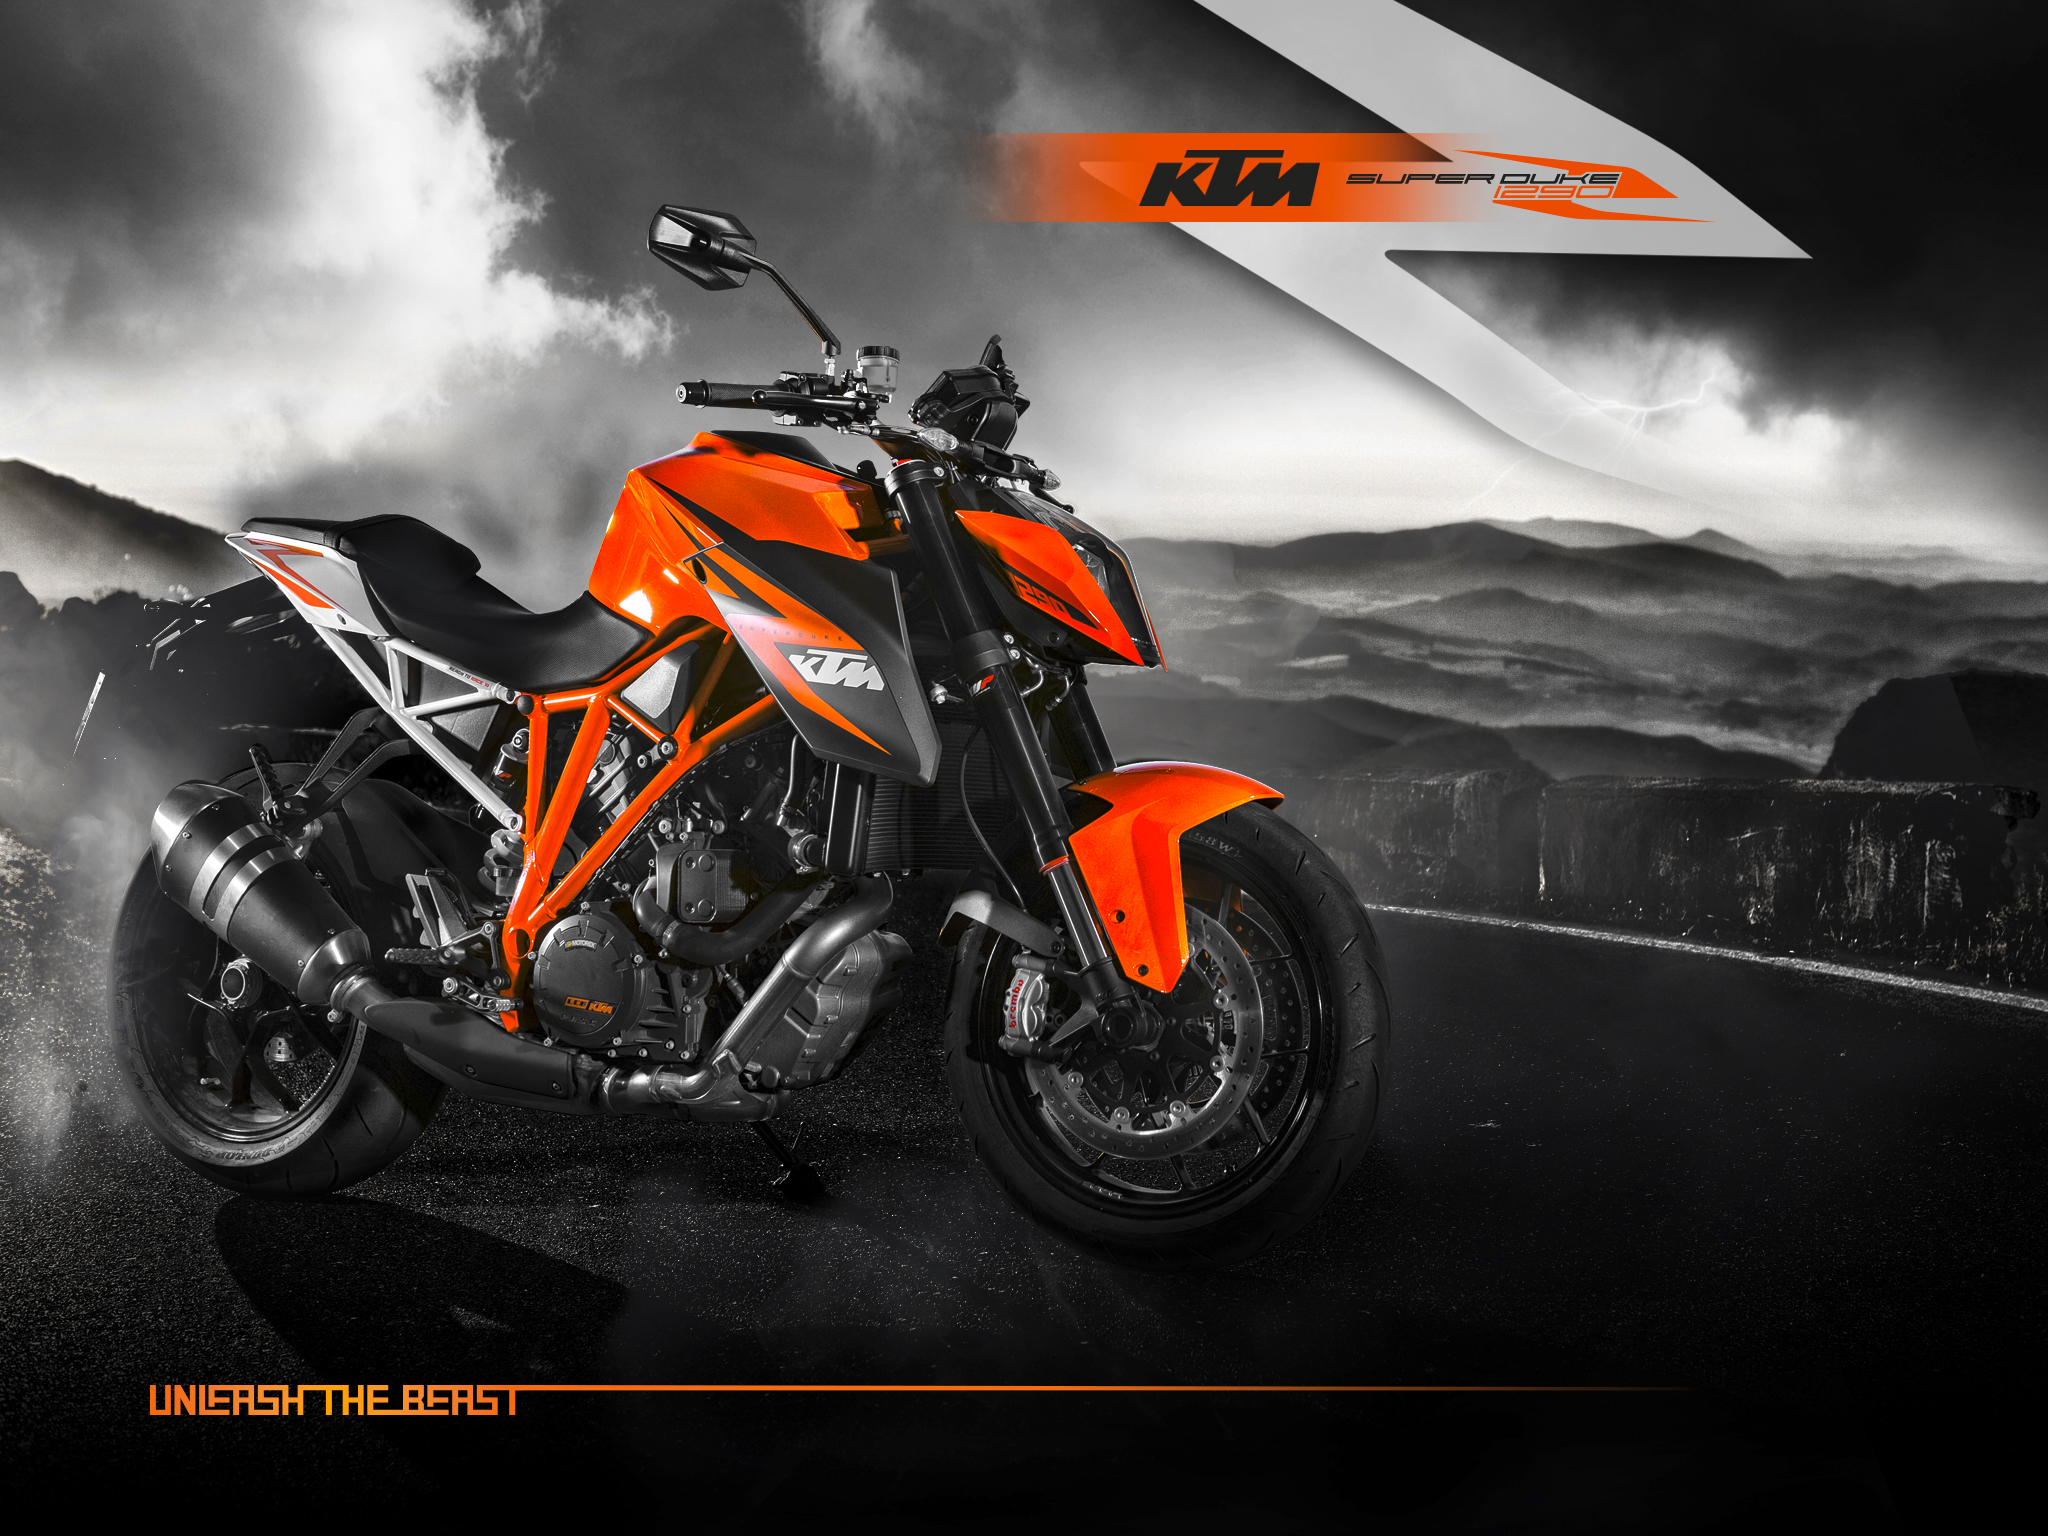 More information on the KTM Super Duke 1290 up on the site!